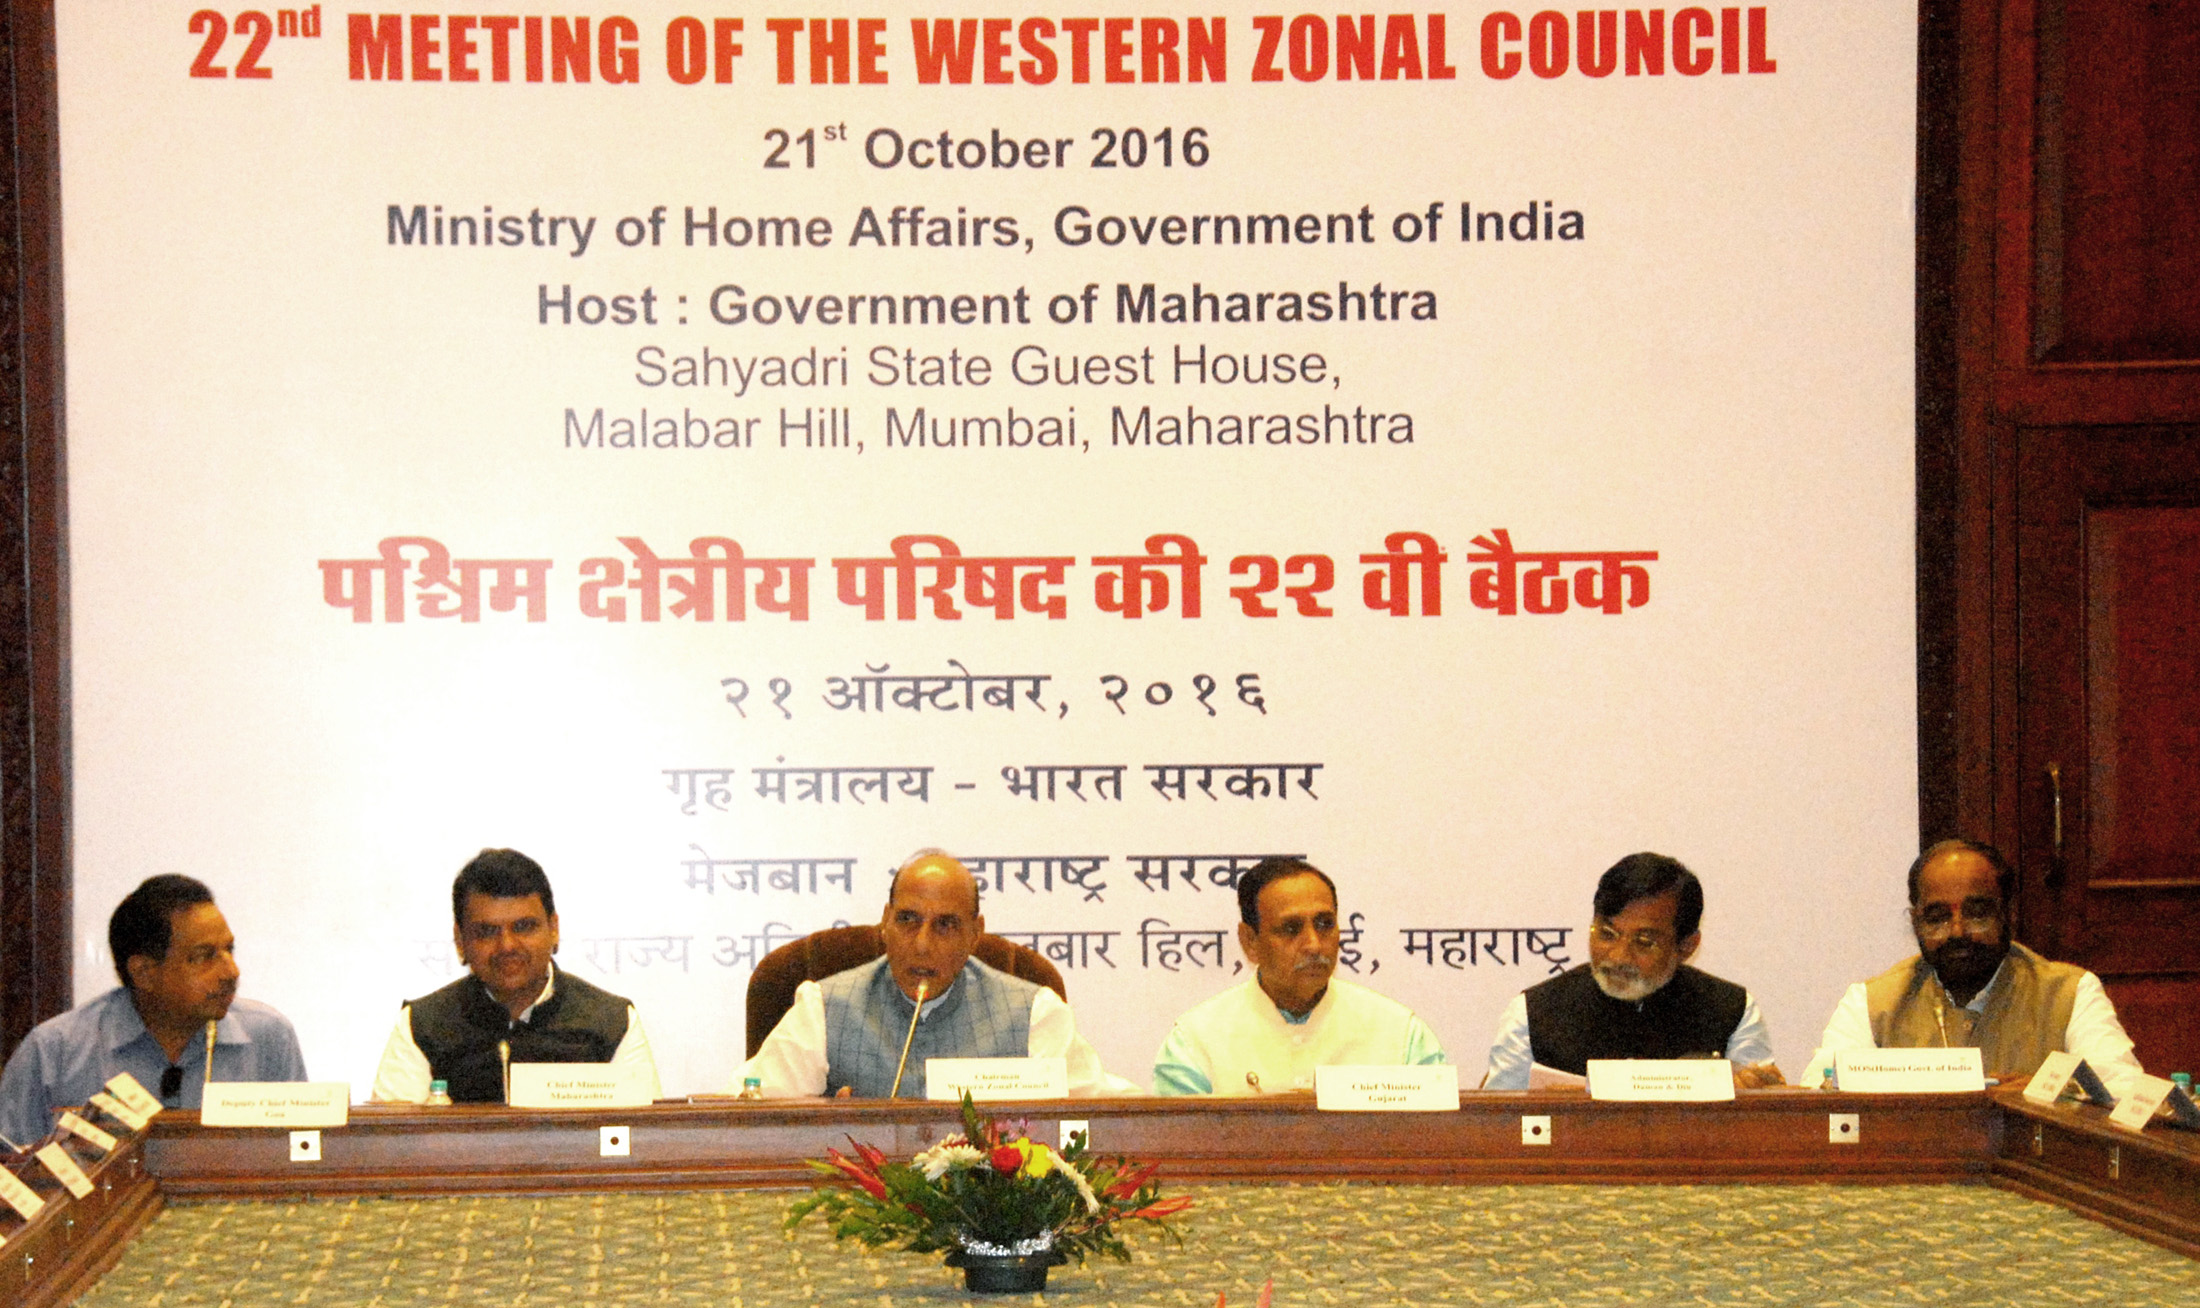 The Union Home Minister, Shri Rajnath Singh chairing the 22nd meeting of the Western Zonal Council, in Mumbai on October 21, 2016.  	The Chief Minister of Maharashtra, Shri Devendra Fadnavis, the Minister of State for Home Affairs, Shri Hansraj Gangaram Ahir and other dignitaries are also seen.